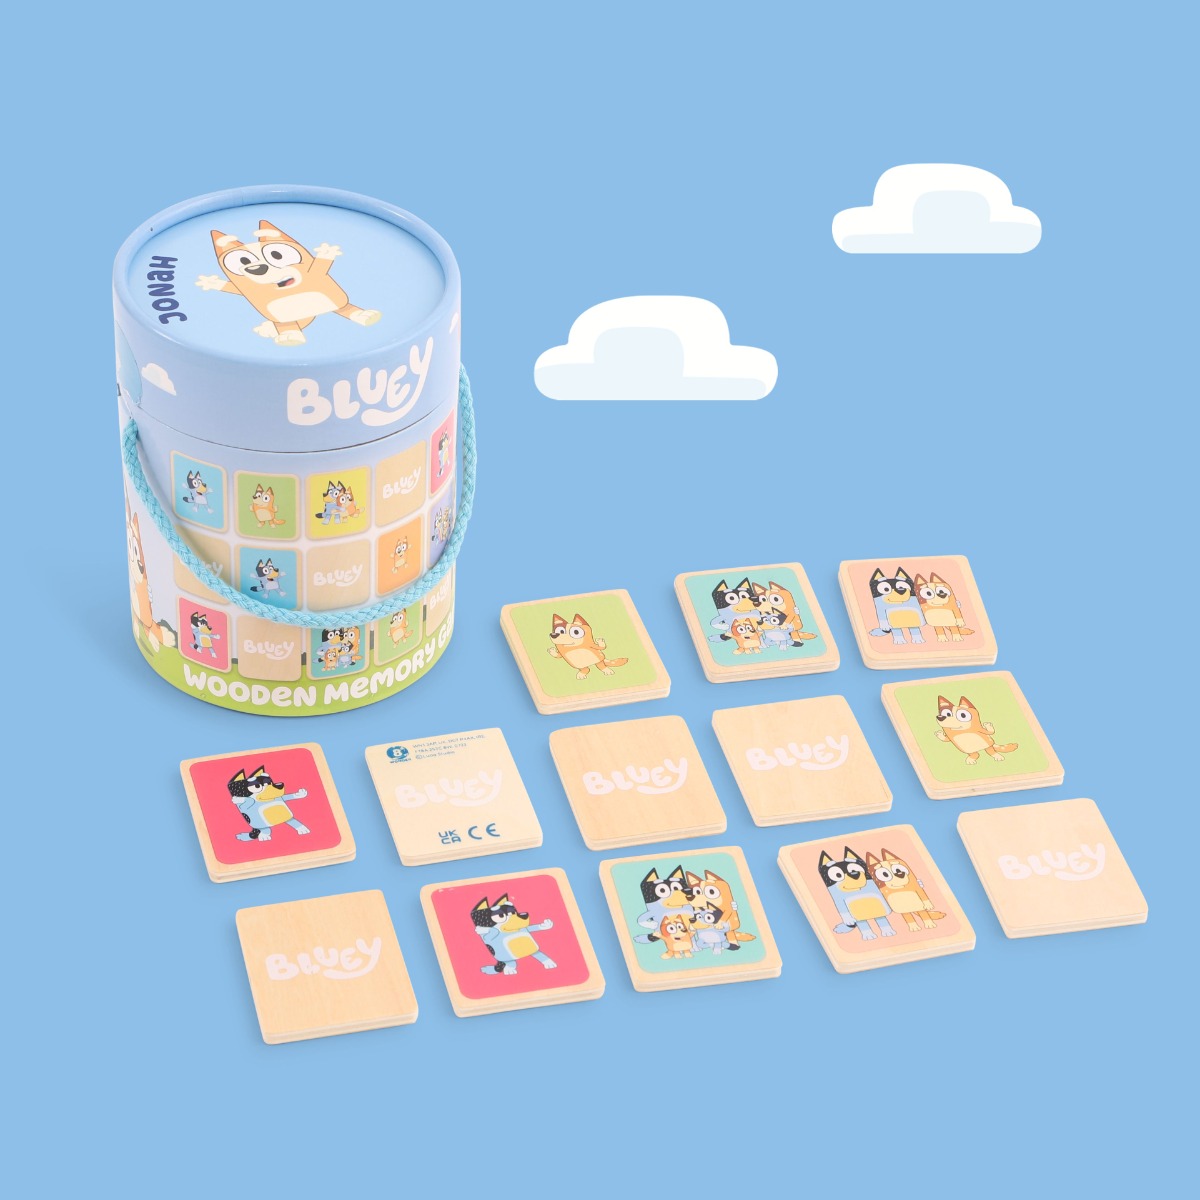 Personalised Bluey Wooden Memory Game